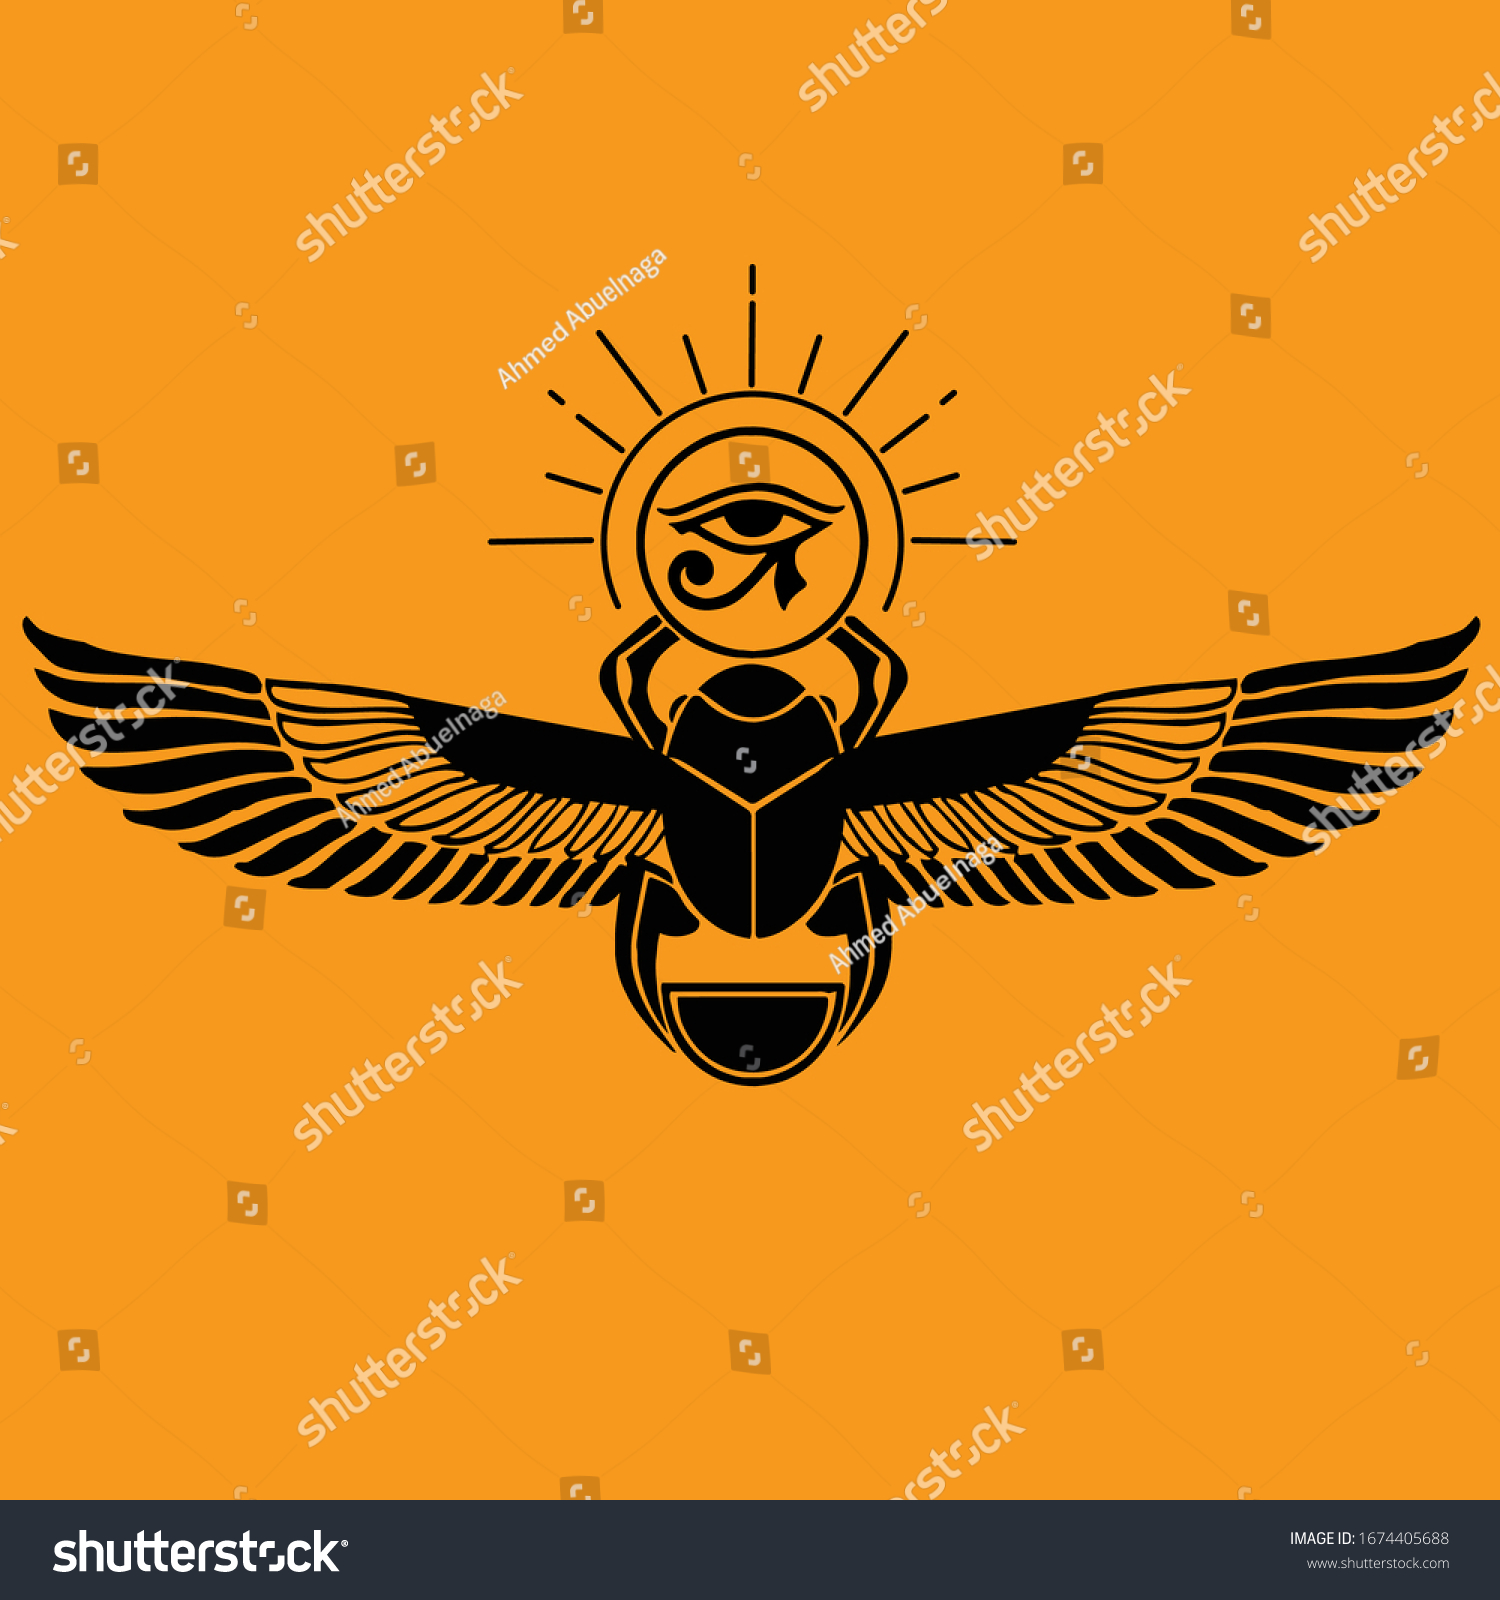 492 Pharaonic icons Images, Stock Photos & Vectors | Shutterstock